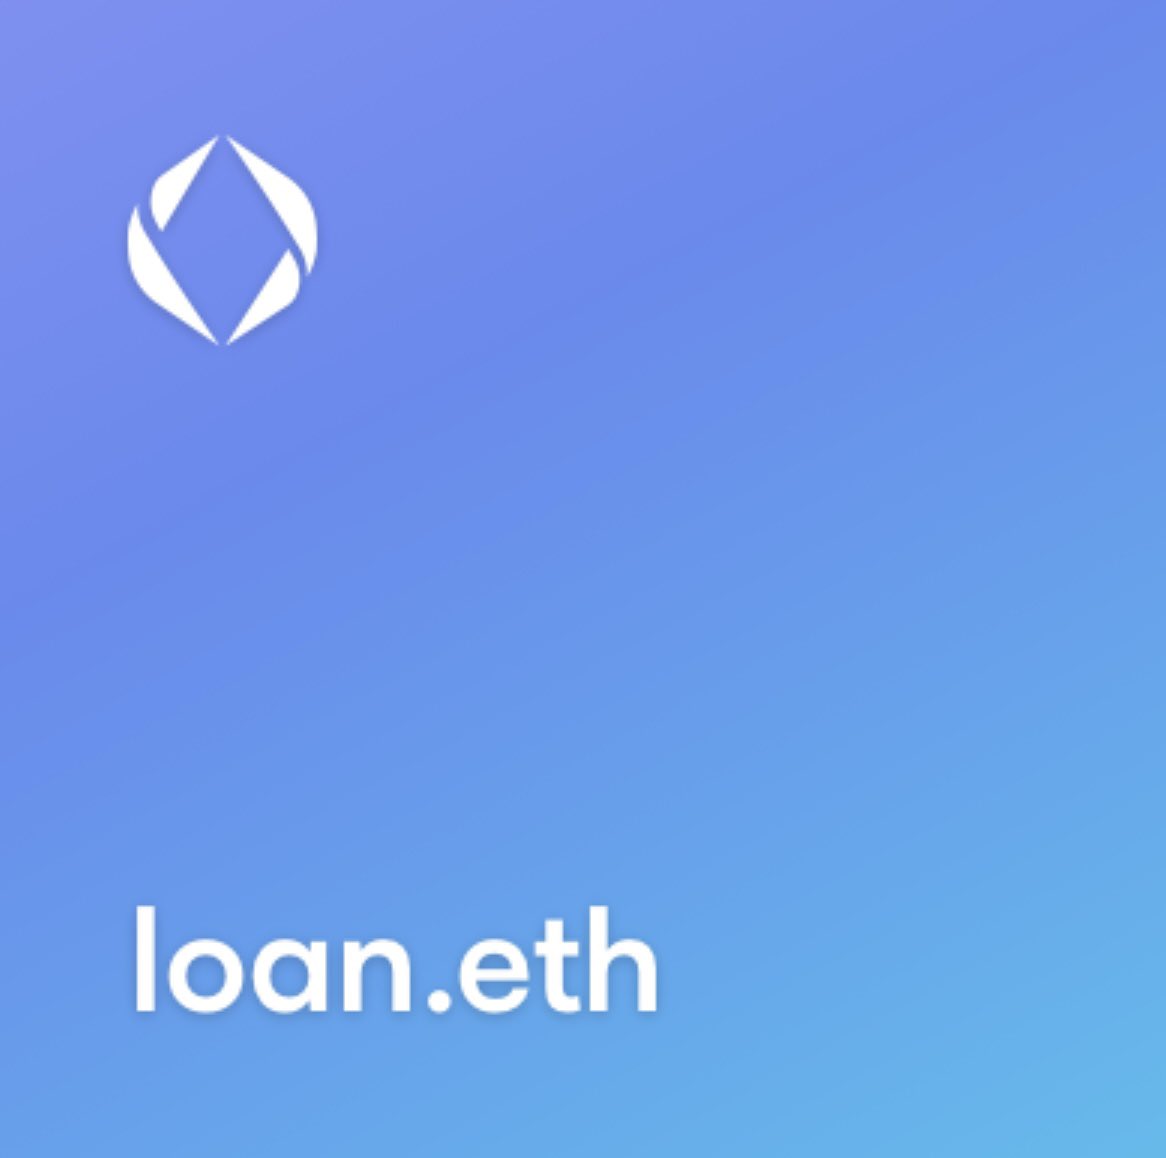 LOAN.ETH 40 Eth ! Ever wanted to own a grail at a discount. This is your chance. ! DM ME or any of our consultants! Let’s  make this happen! @RocketXLabsENS #ens #web3names
#web3 #web3domains